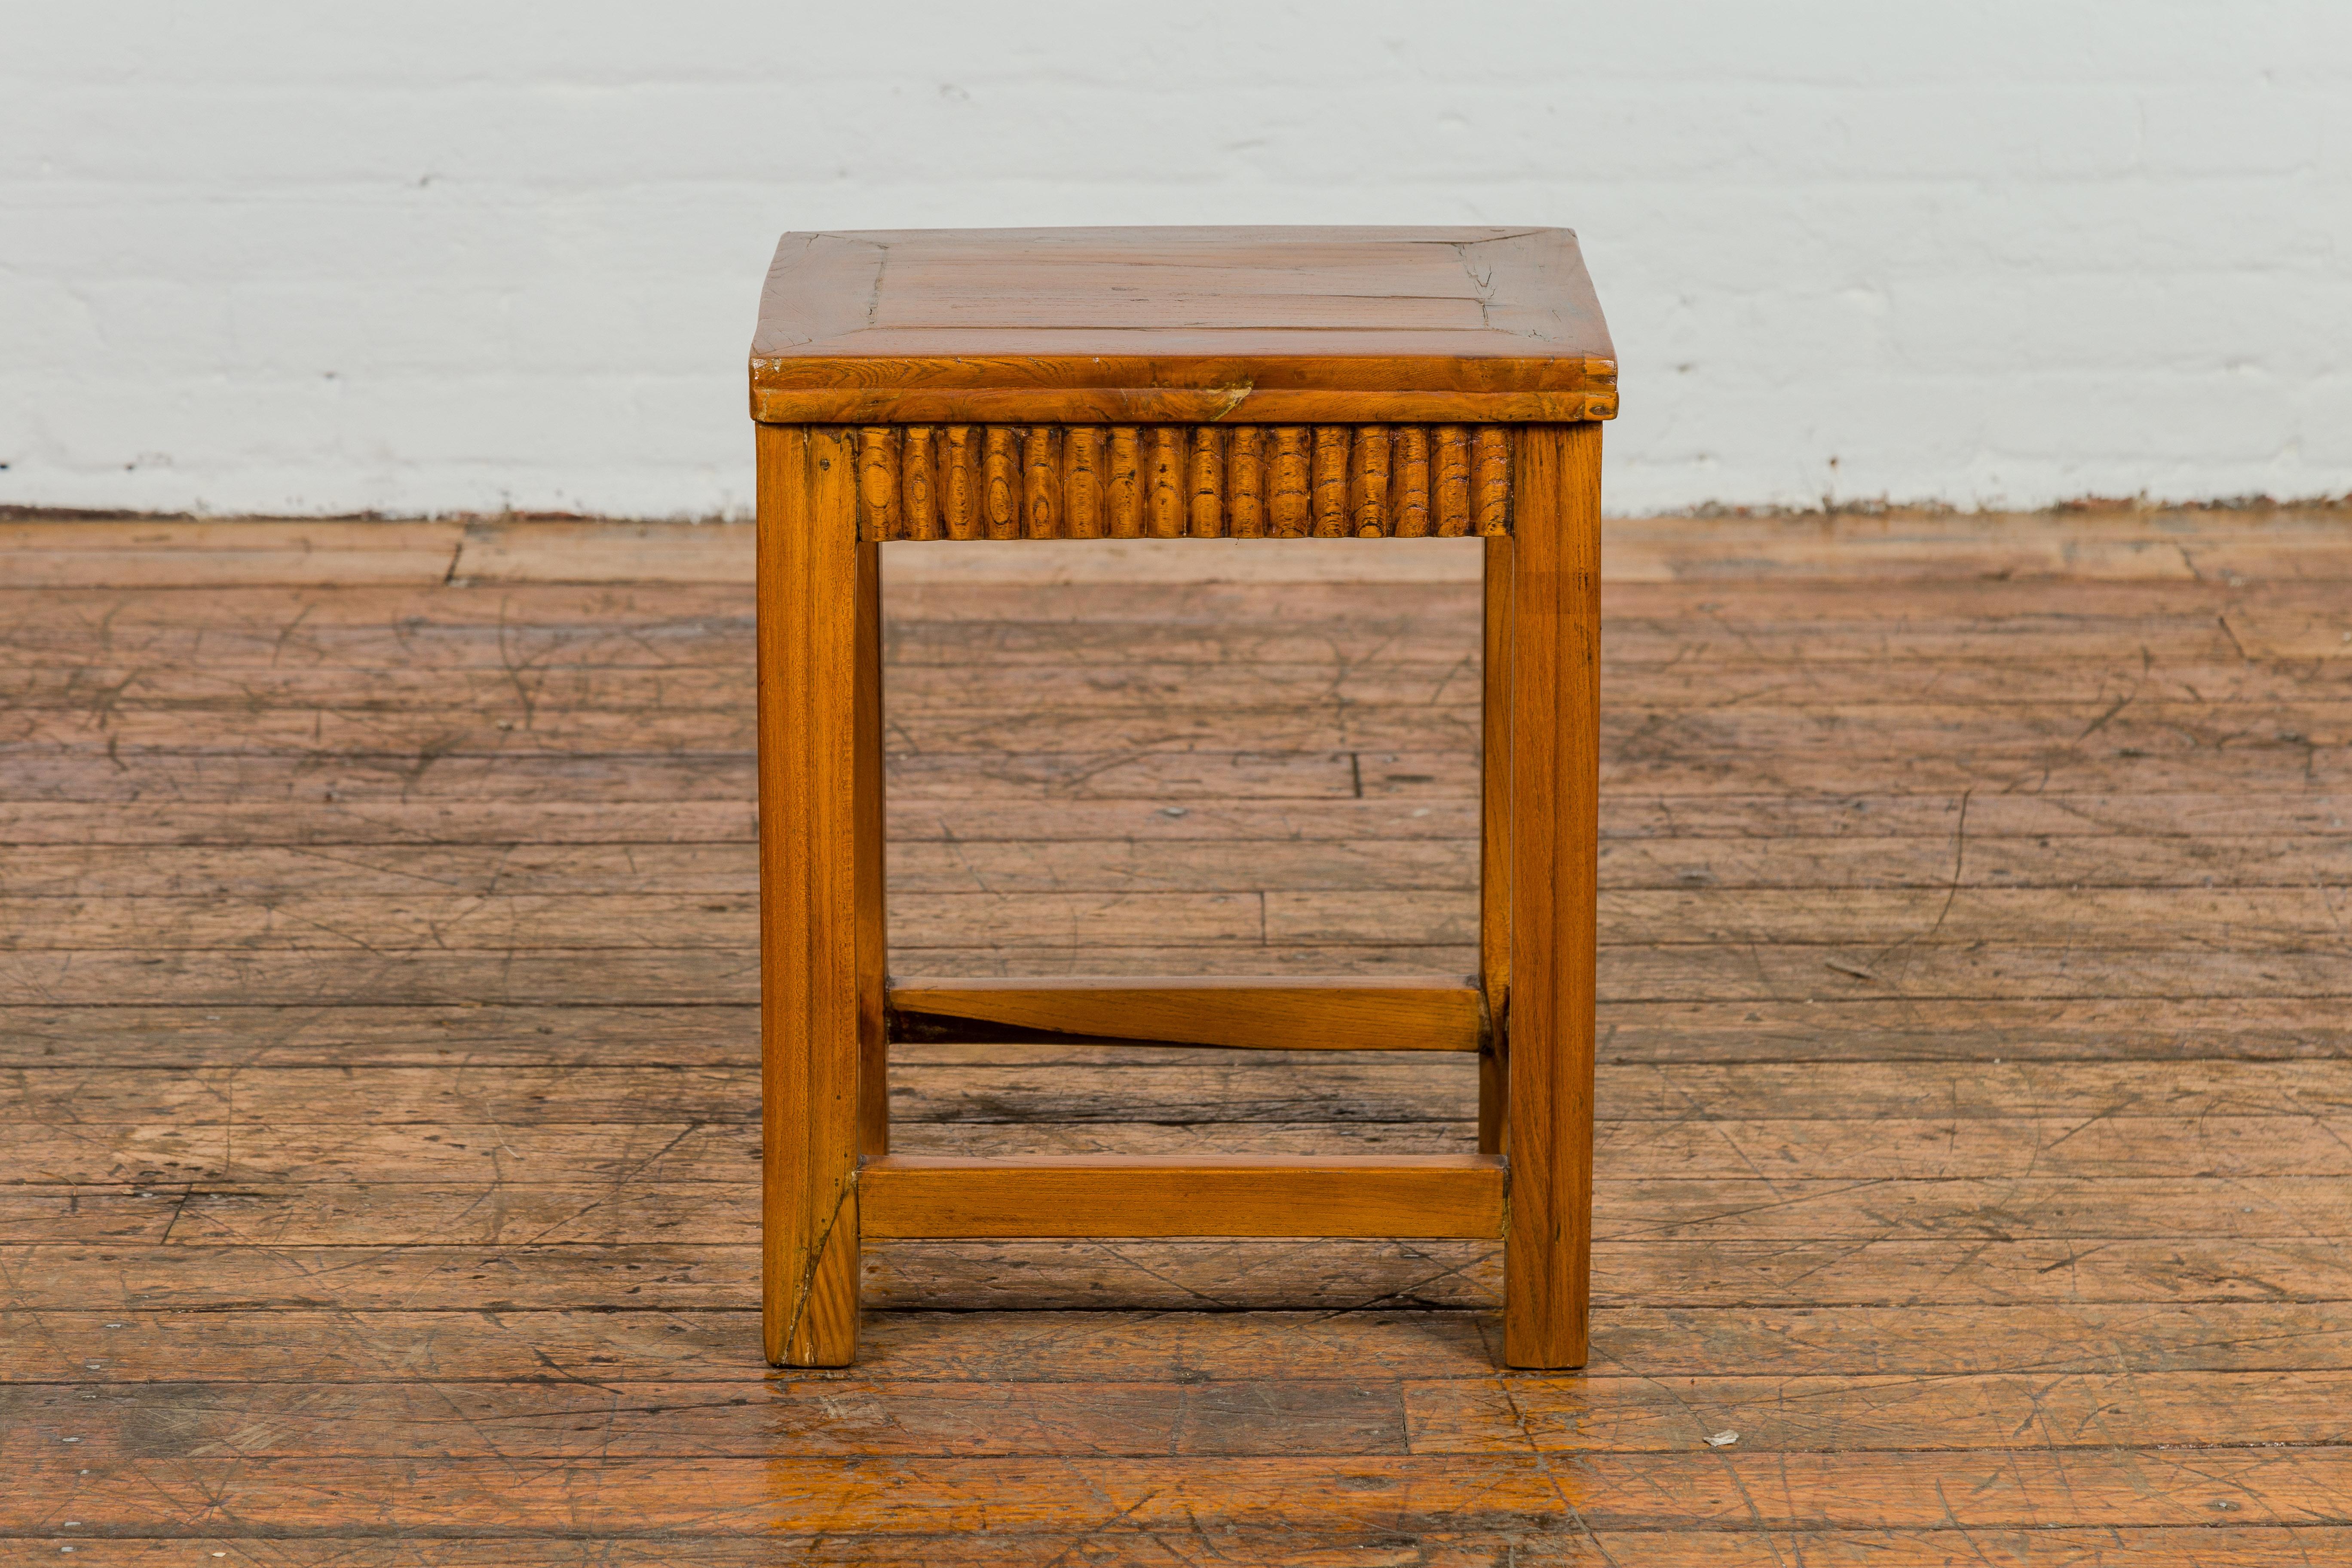 Late Qing Dynasty Side Table with Carved Reeded Apron and Side Stretchers In Good Condition For Sale In Yonkers, NY